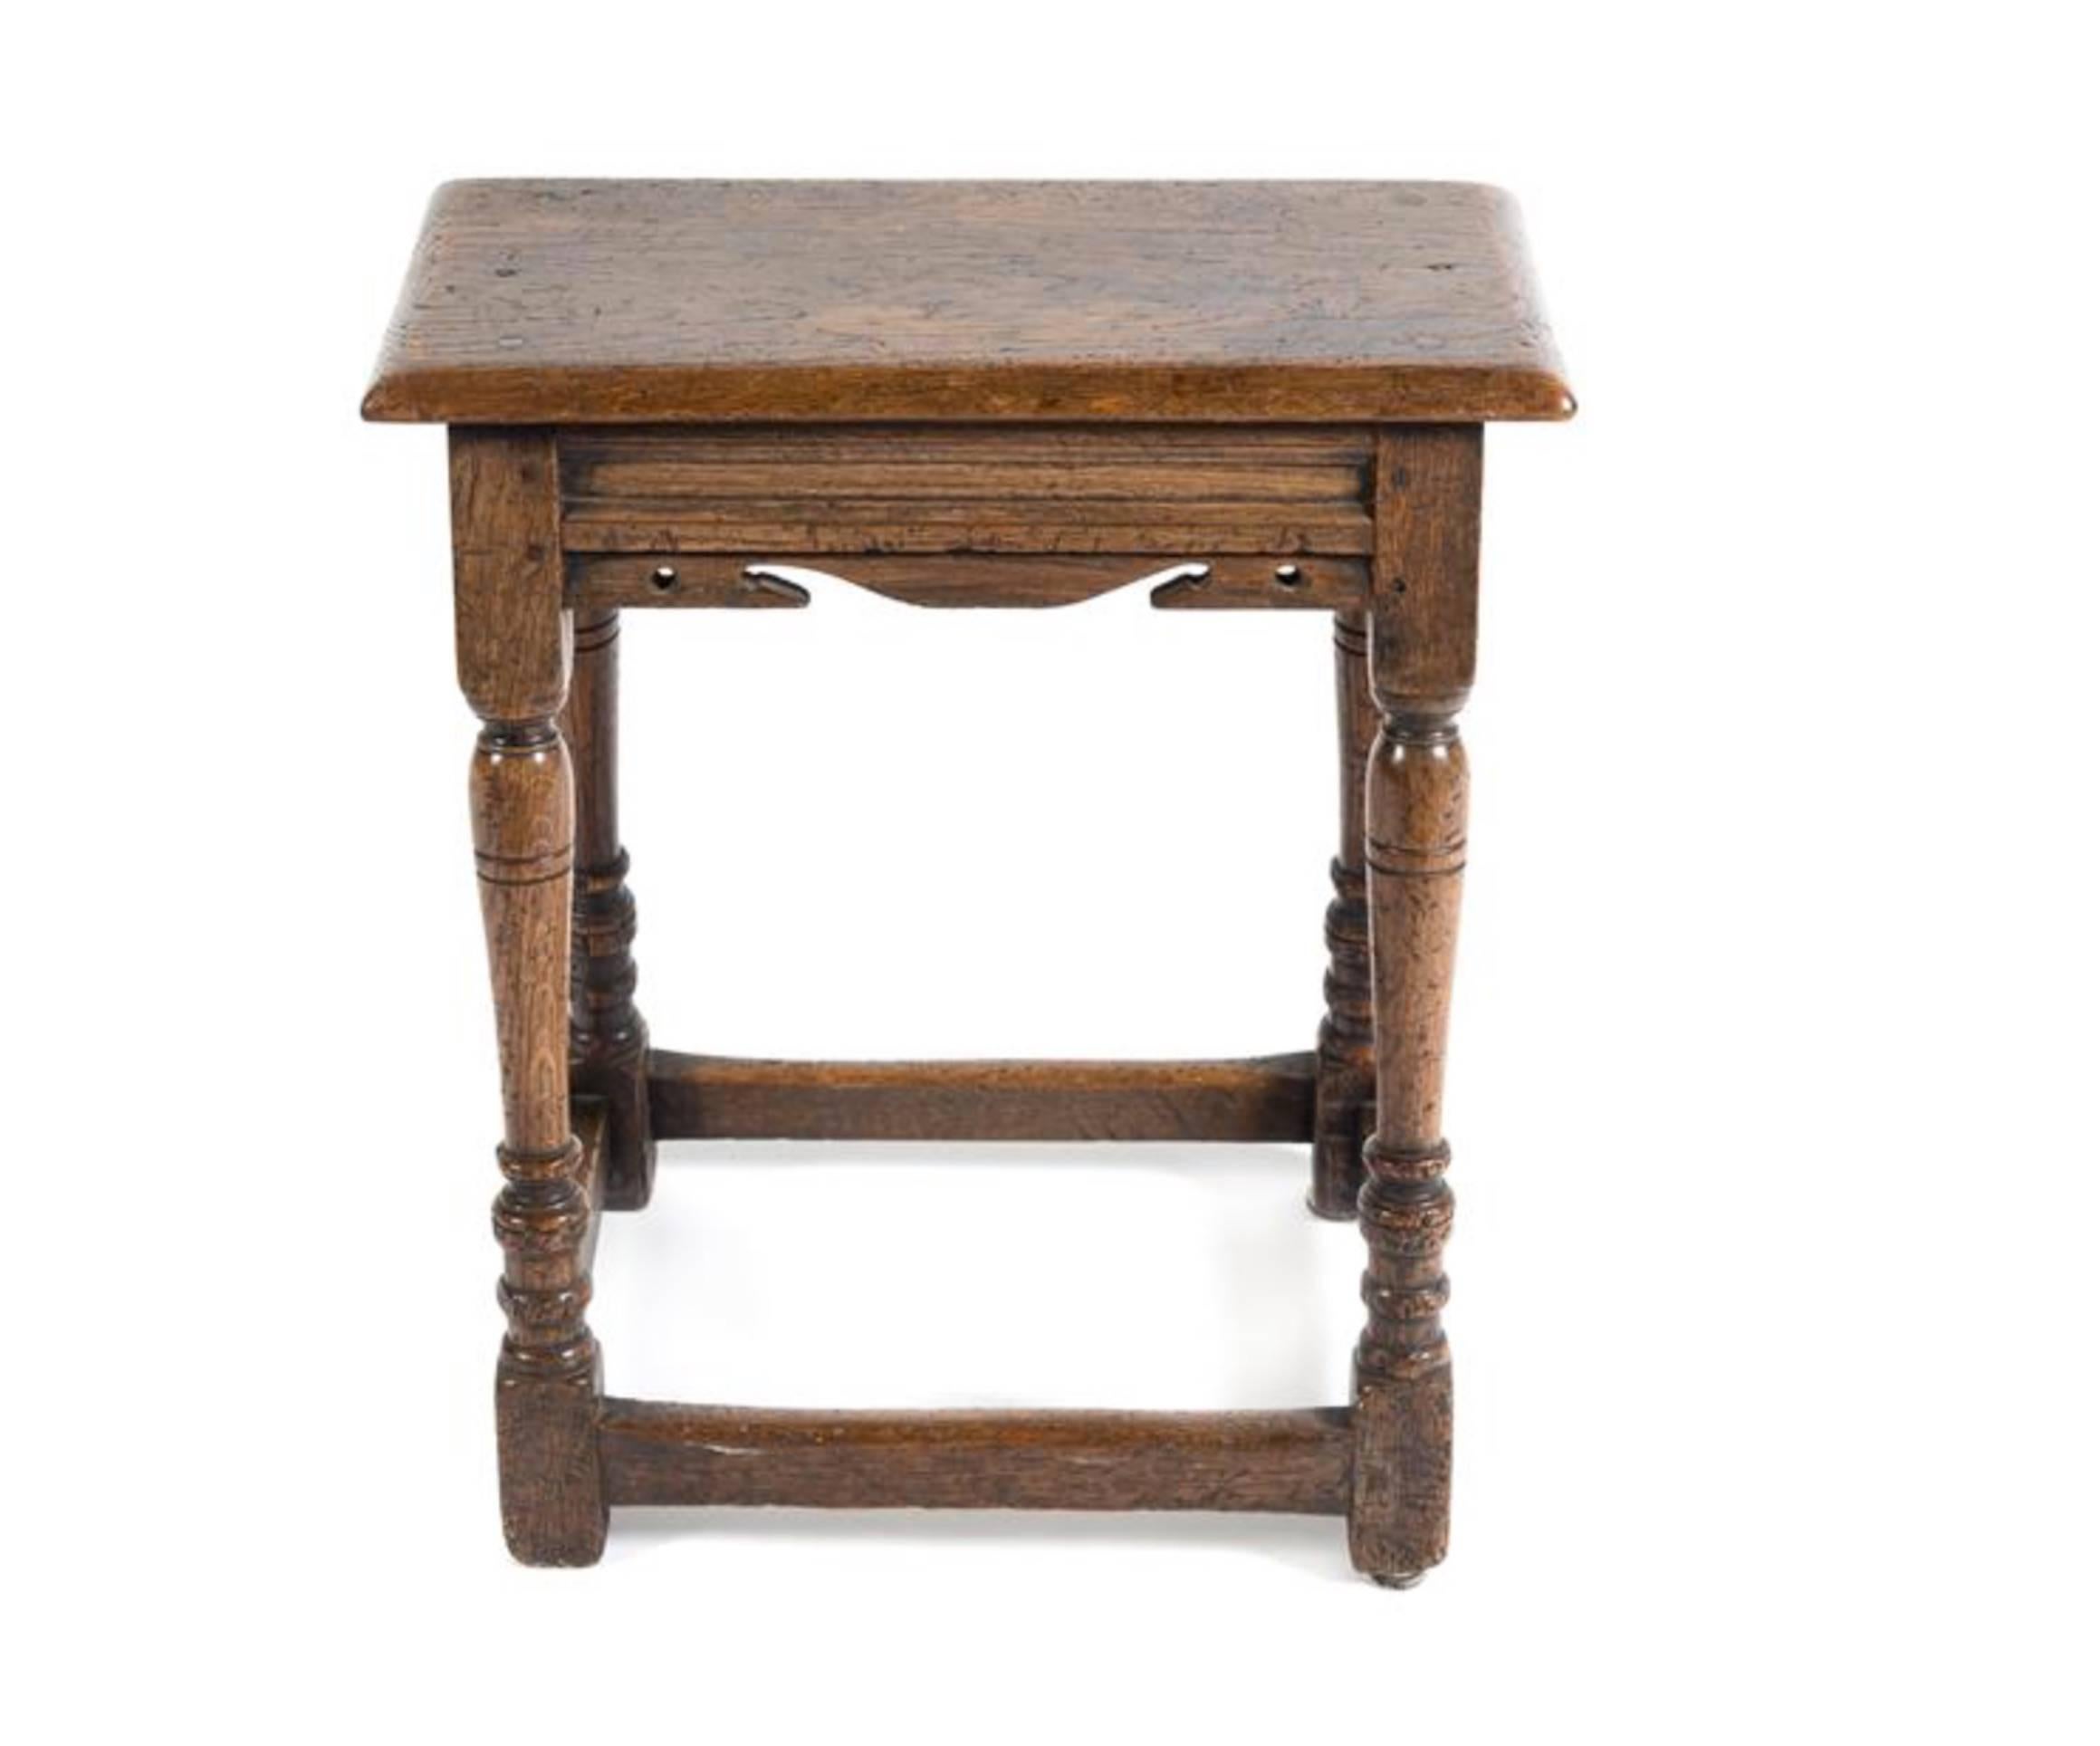 17th century style Jacobean English oak stool/drinks table, great color/patina.